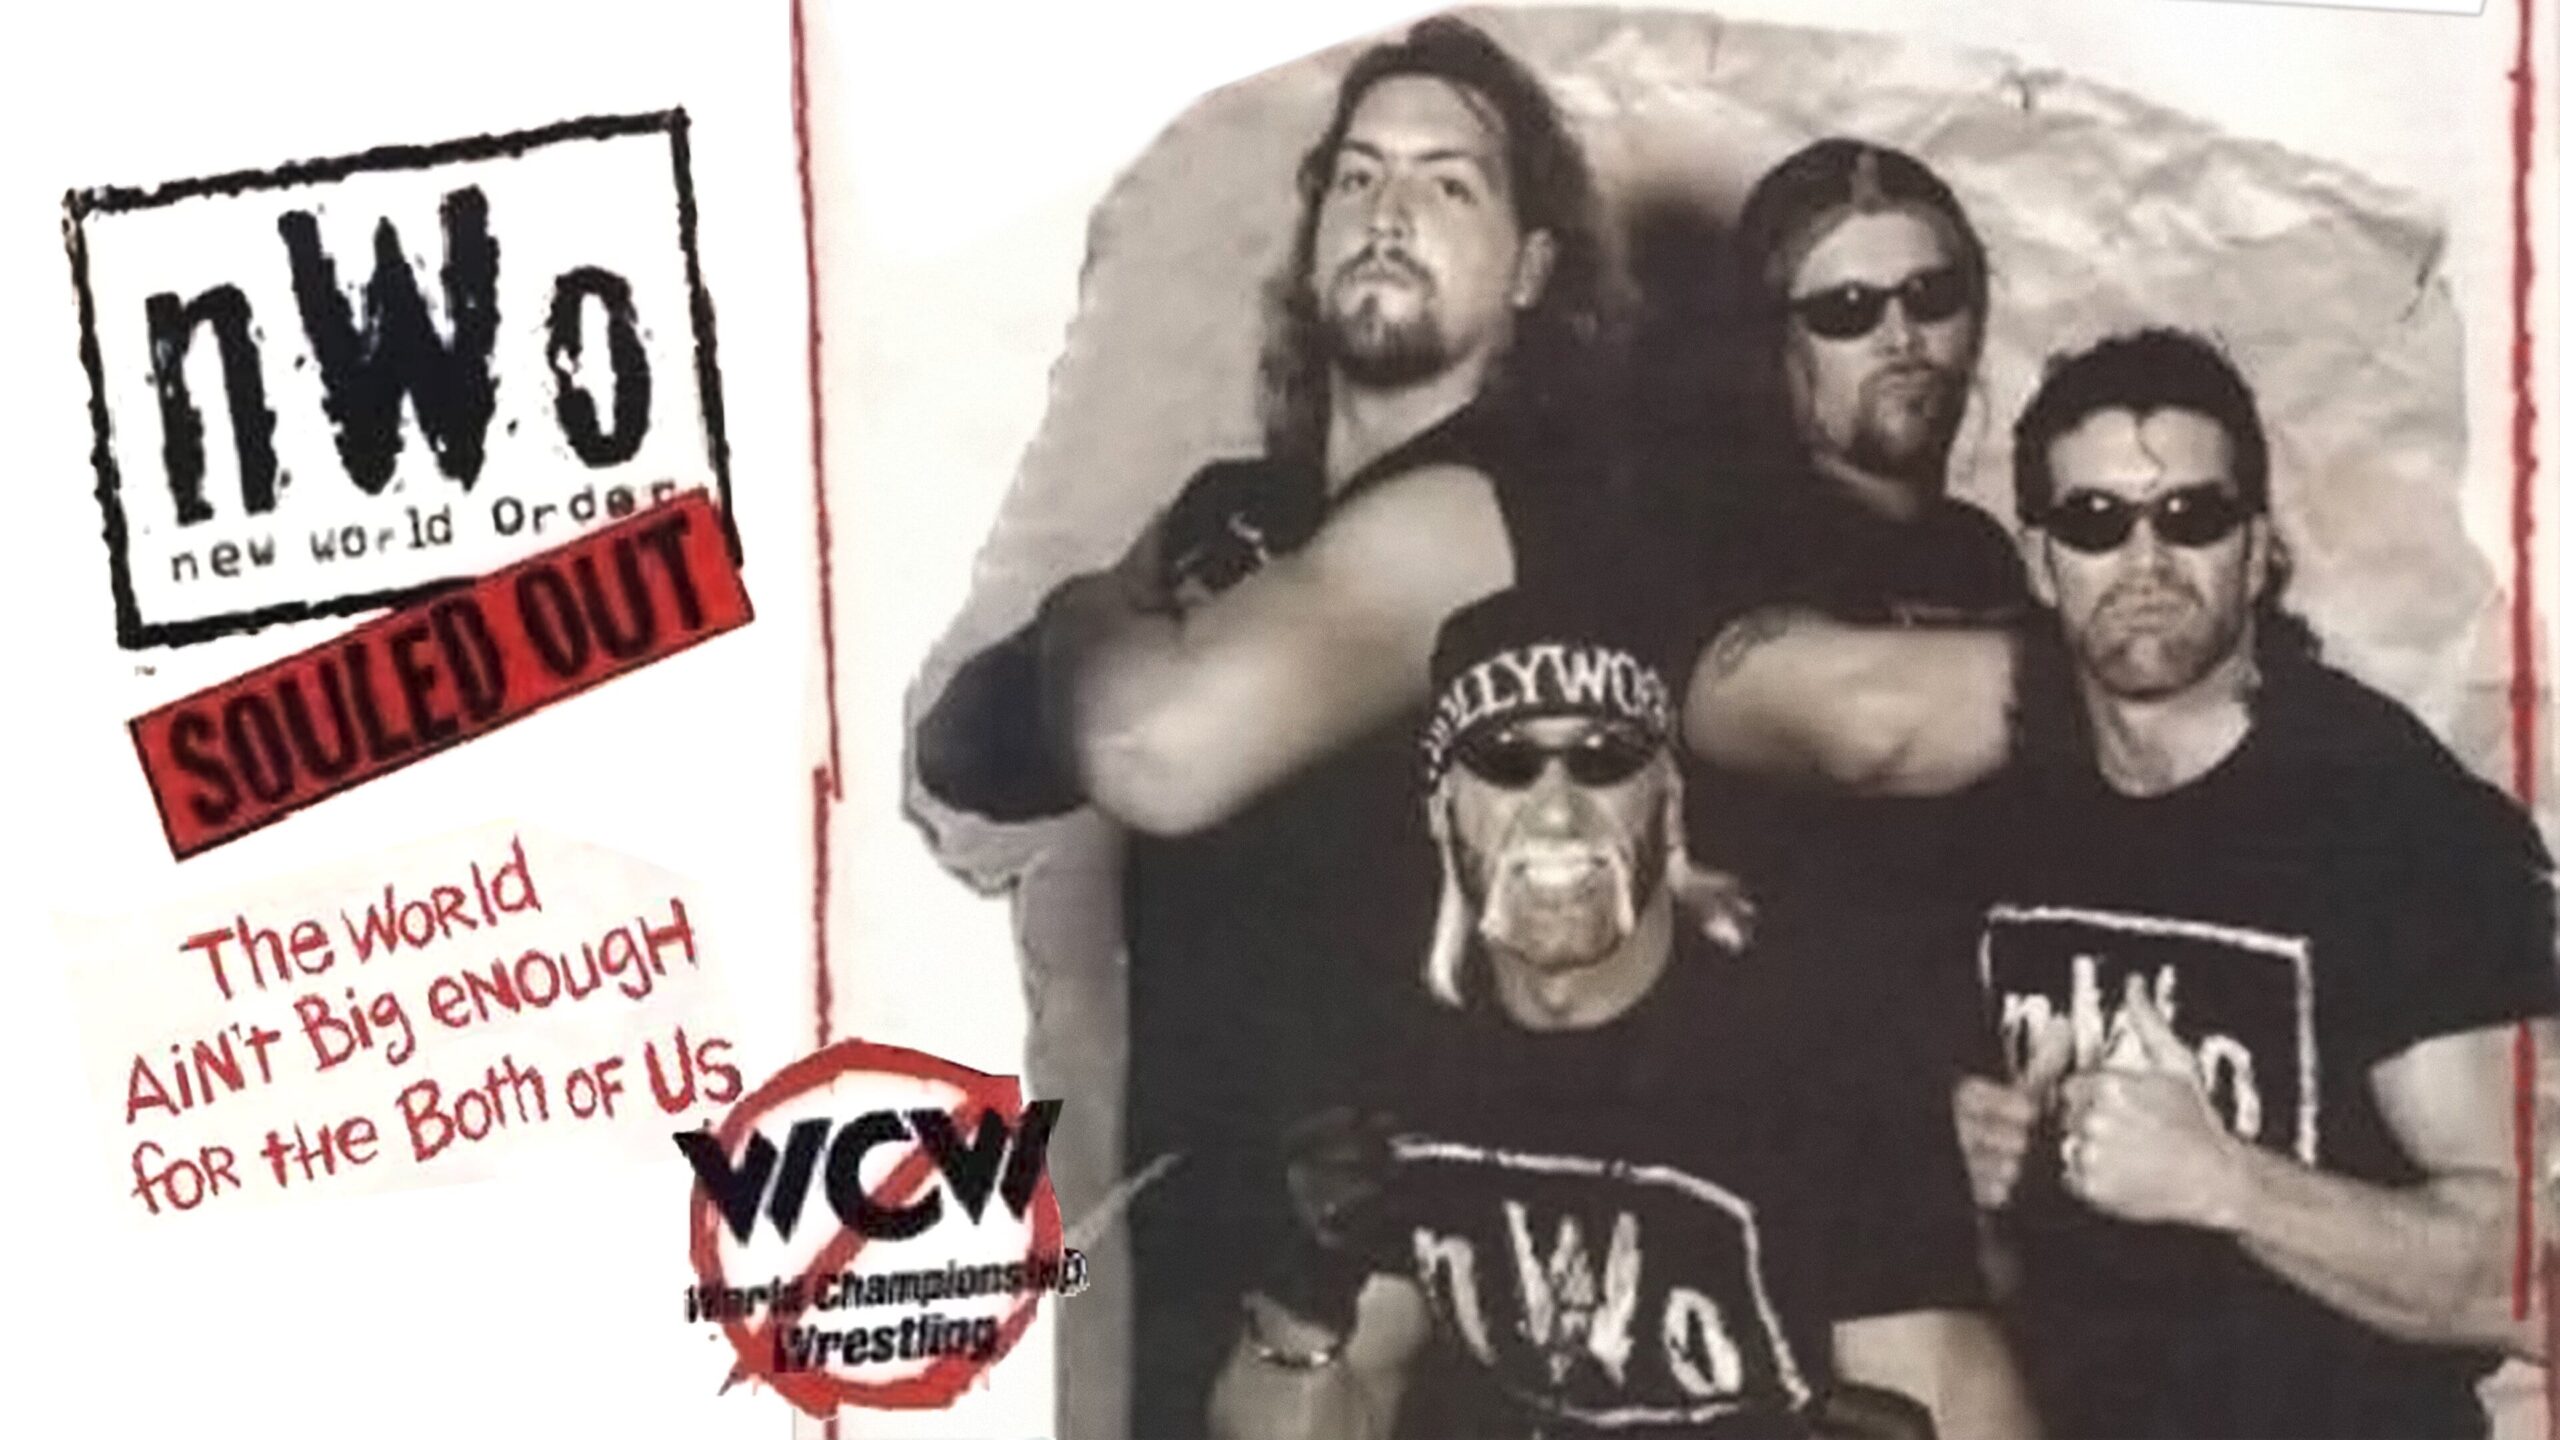 Pôster do WCW Souled Out 1997